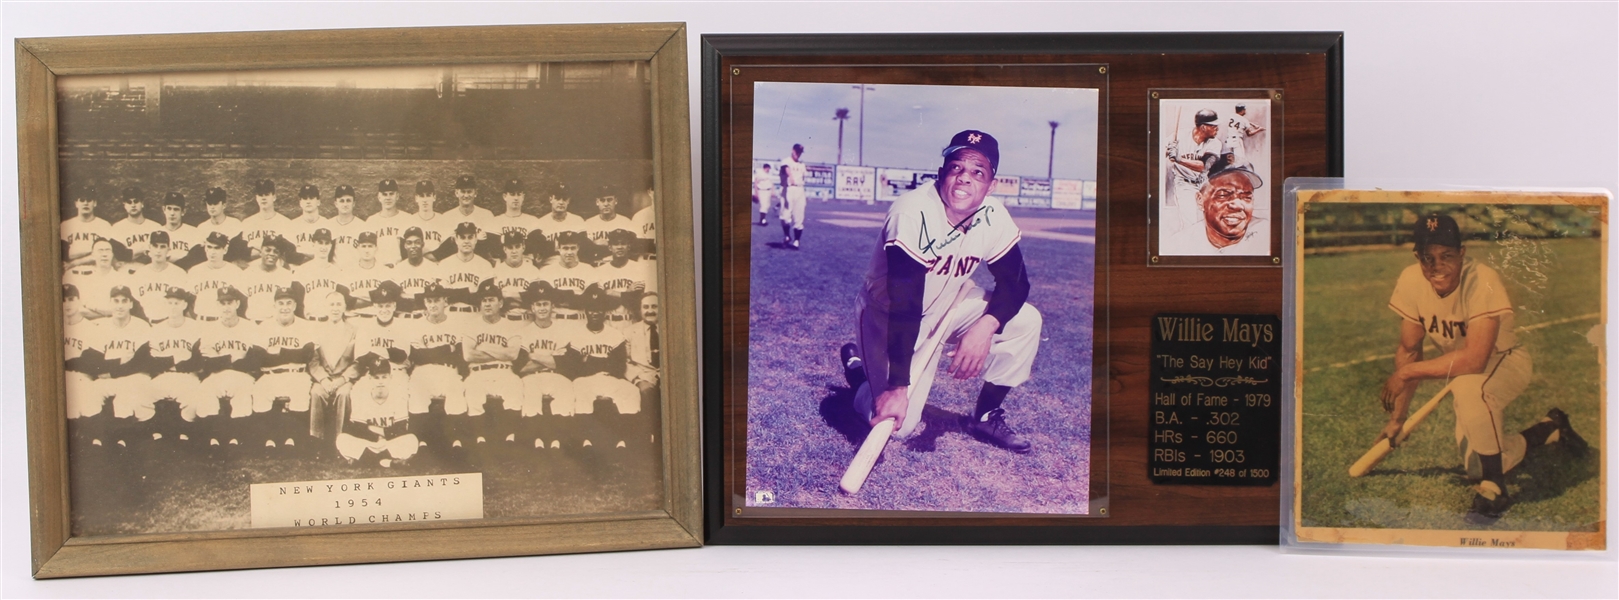 1950s-90s Willie Mays New York Giants Memorabilia Collection - Lot of 3 w/ Framed Photo, Signed Photo Display & More (JSA)